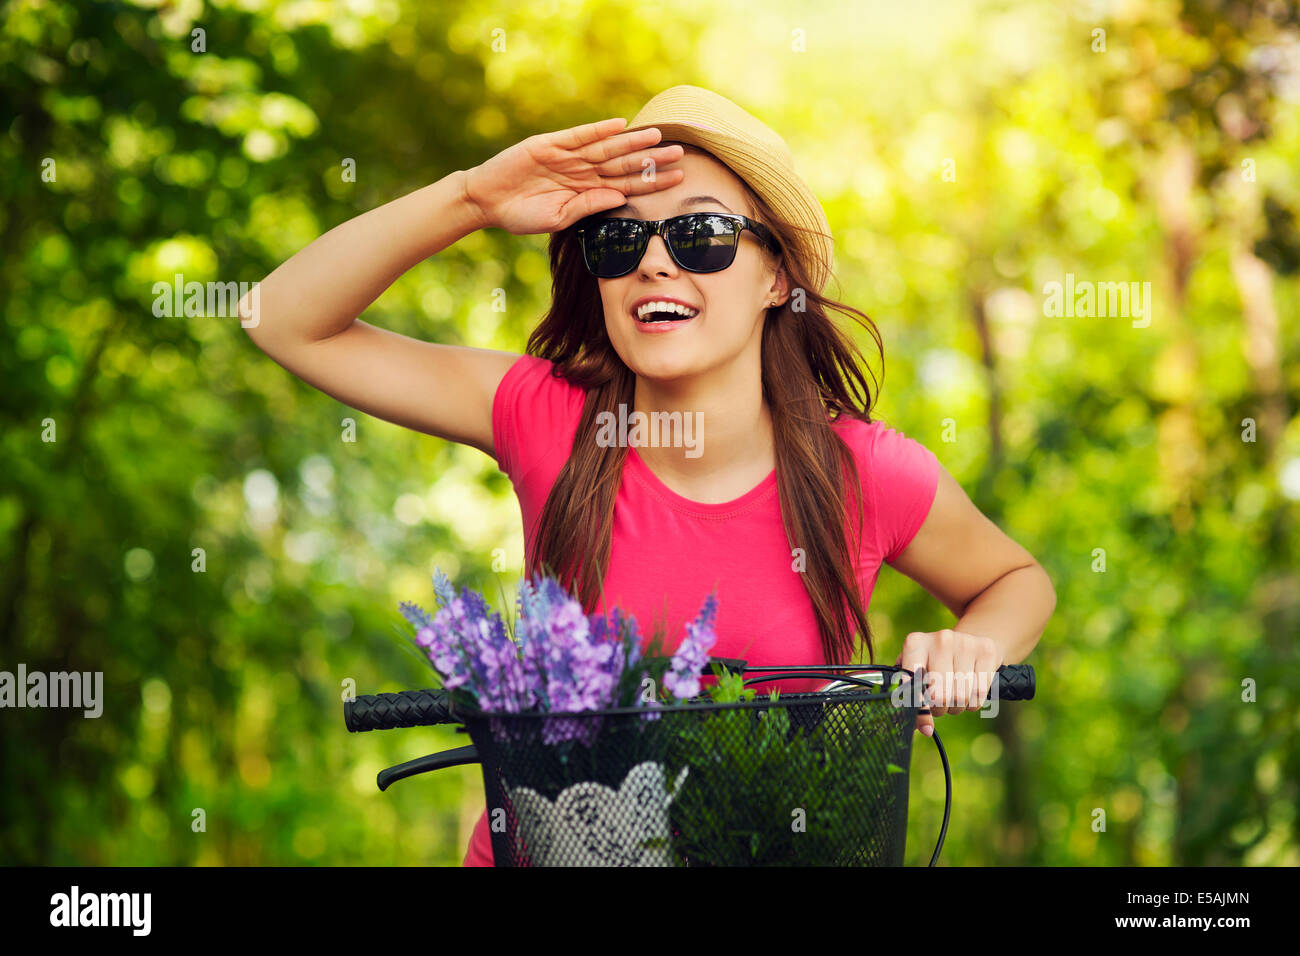 Happy woman with bike watching something, Debica, Poland Stock Photo